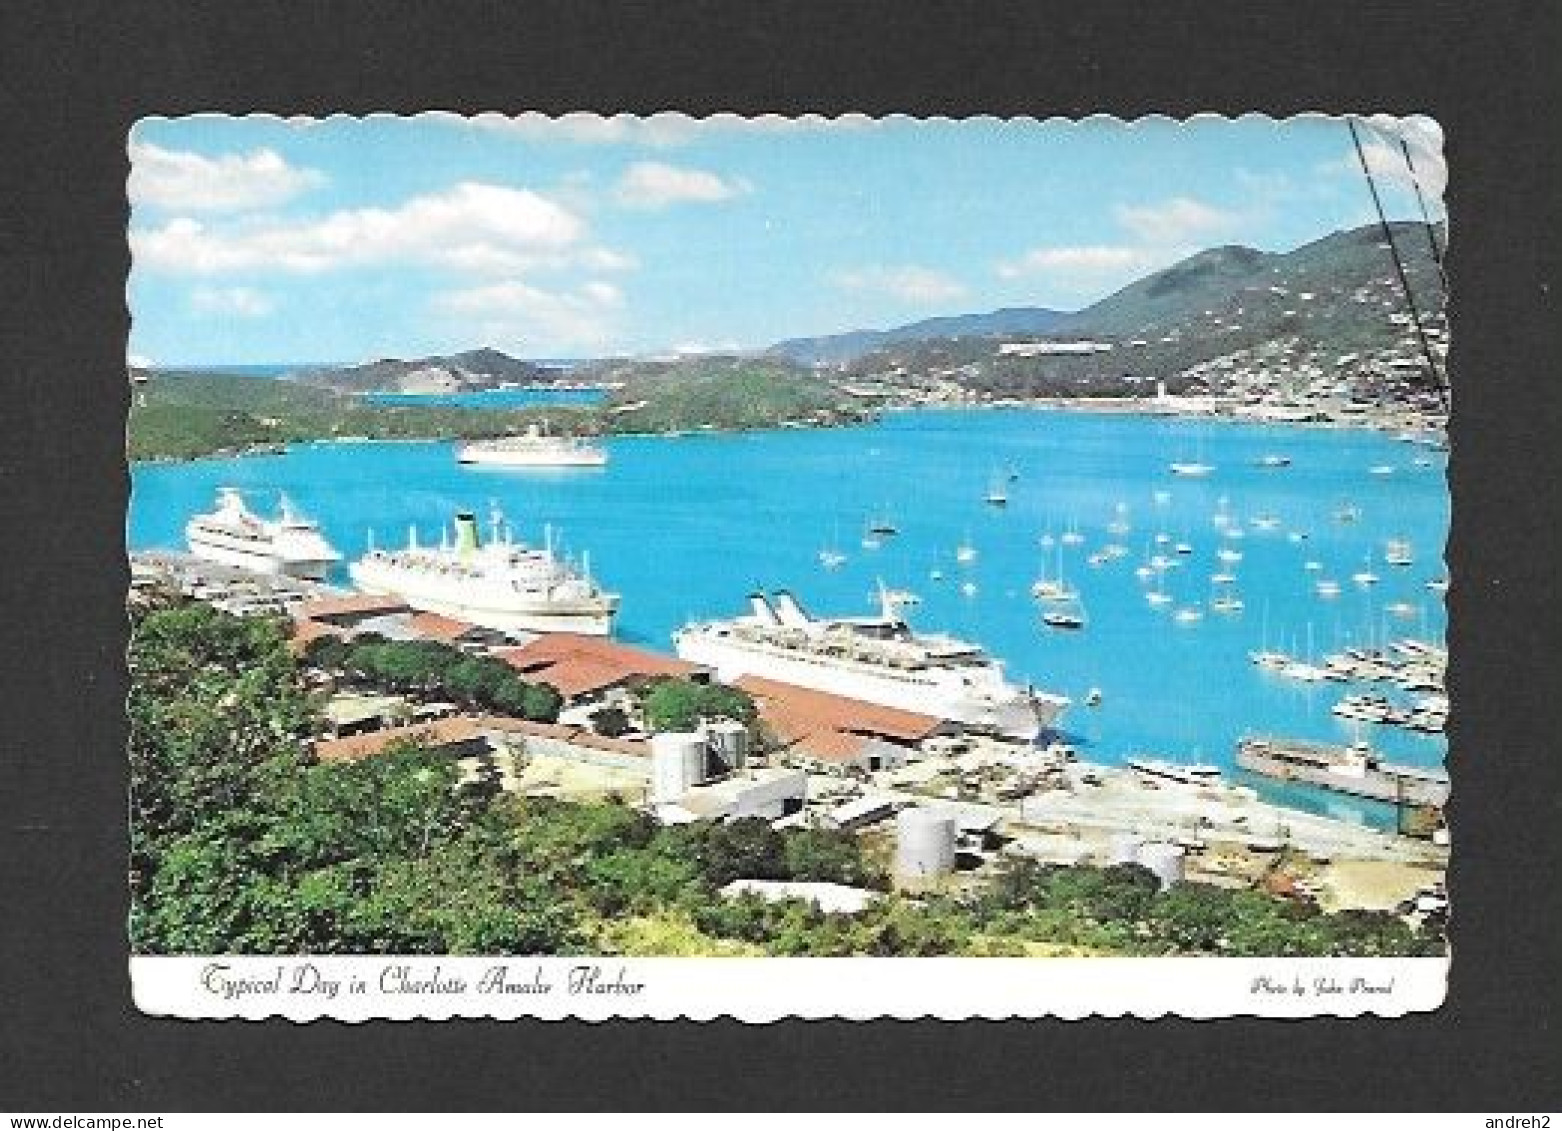 St Thomas Virgin Islands - Typical Day In Charlotte Amalie Harbor Cruise Ships - Nice New Stamp - Photo By John Penrod - Virgin Islands, US